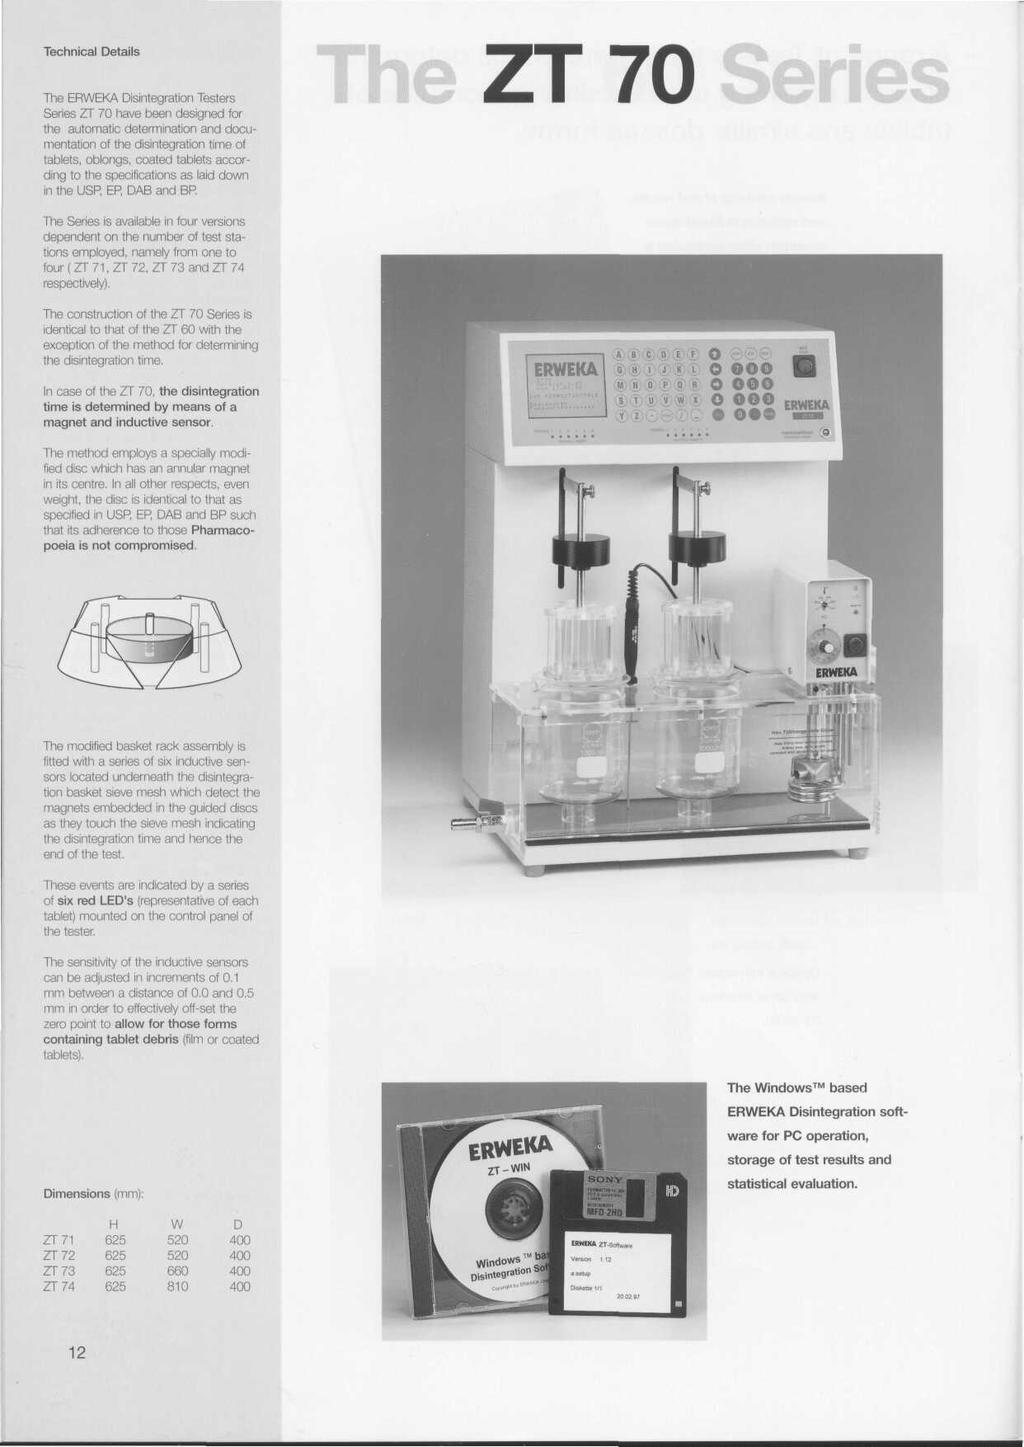 The ERWEKA Disintegration Testers Series ZT 70 have been designed for the automatic determination and documentation of the disintegration time of tablets, oblongs, coated tablets according to the